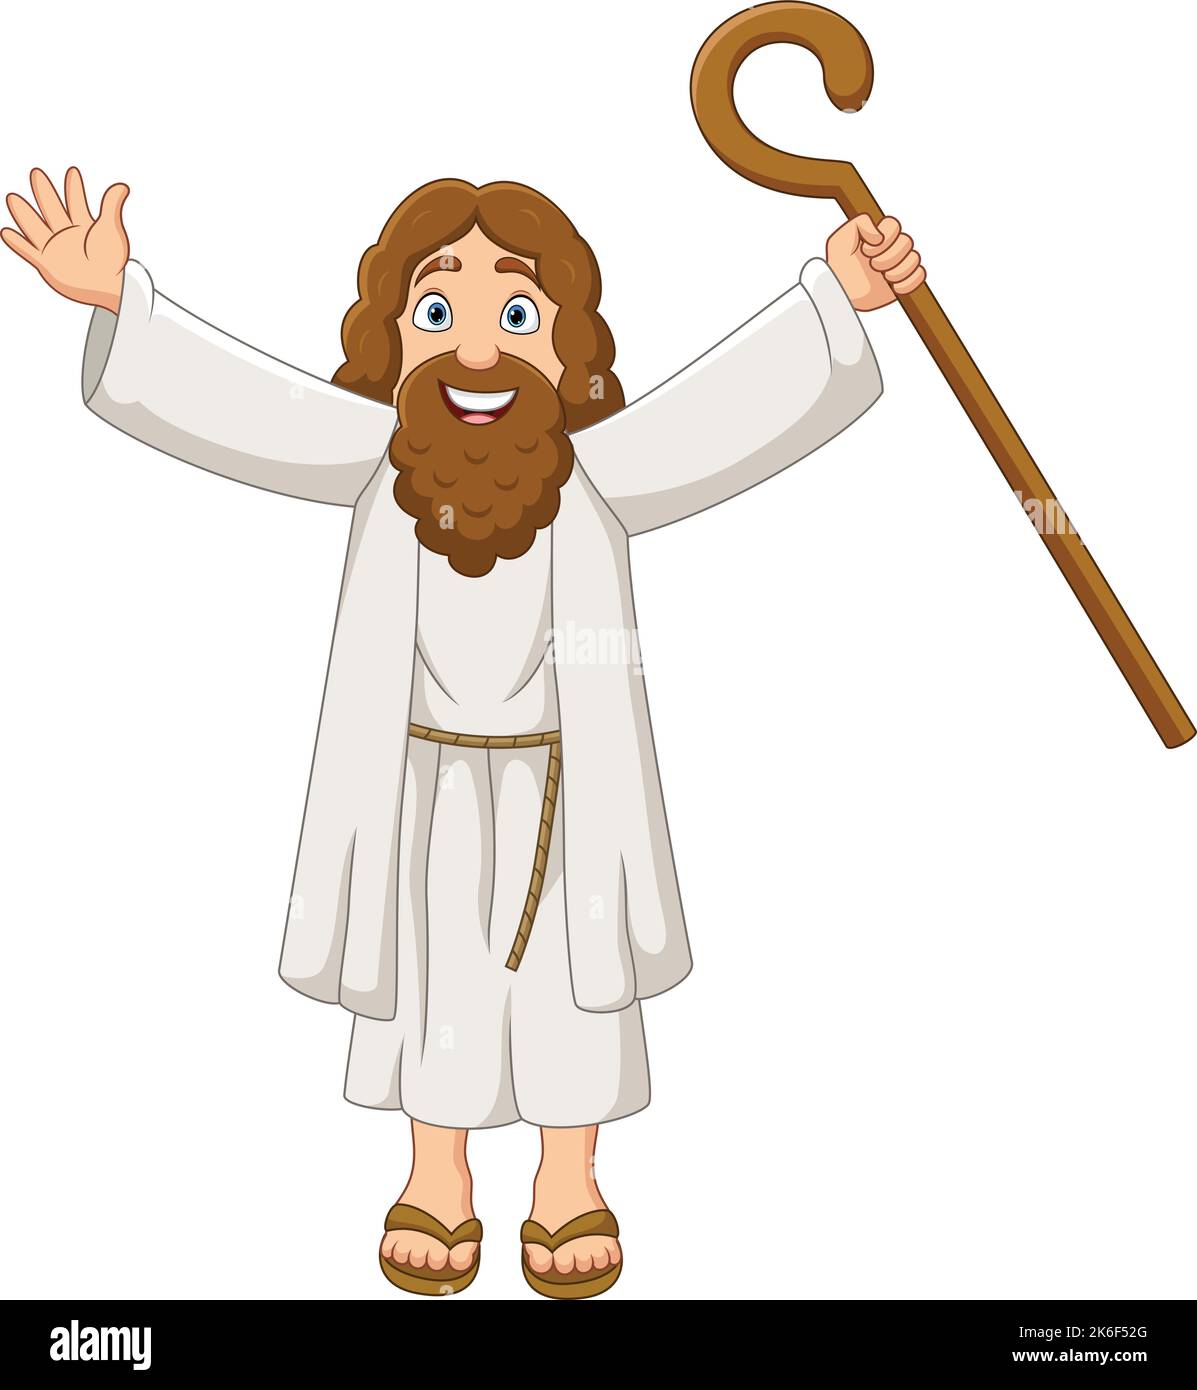 Cartoon Moses holding wooden staff with open arms Stock Vector